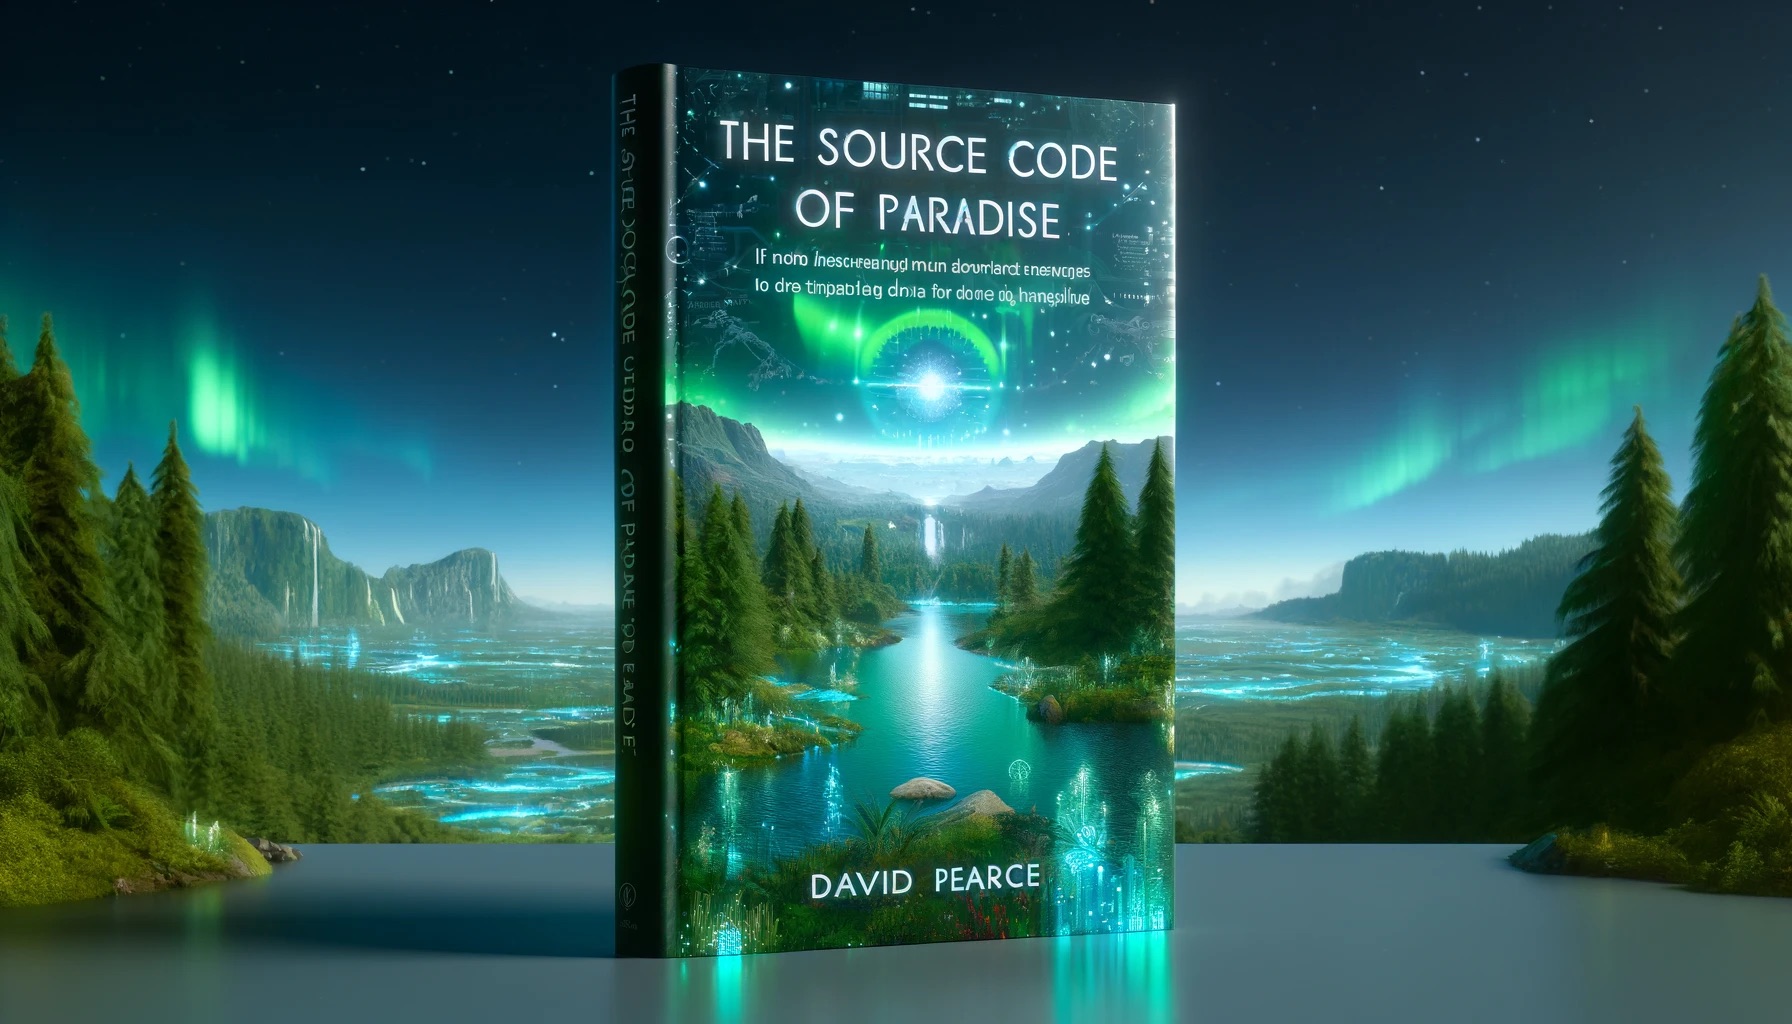 The Source Code of Paradise by David Pearce